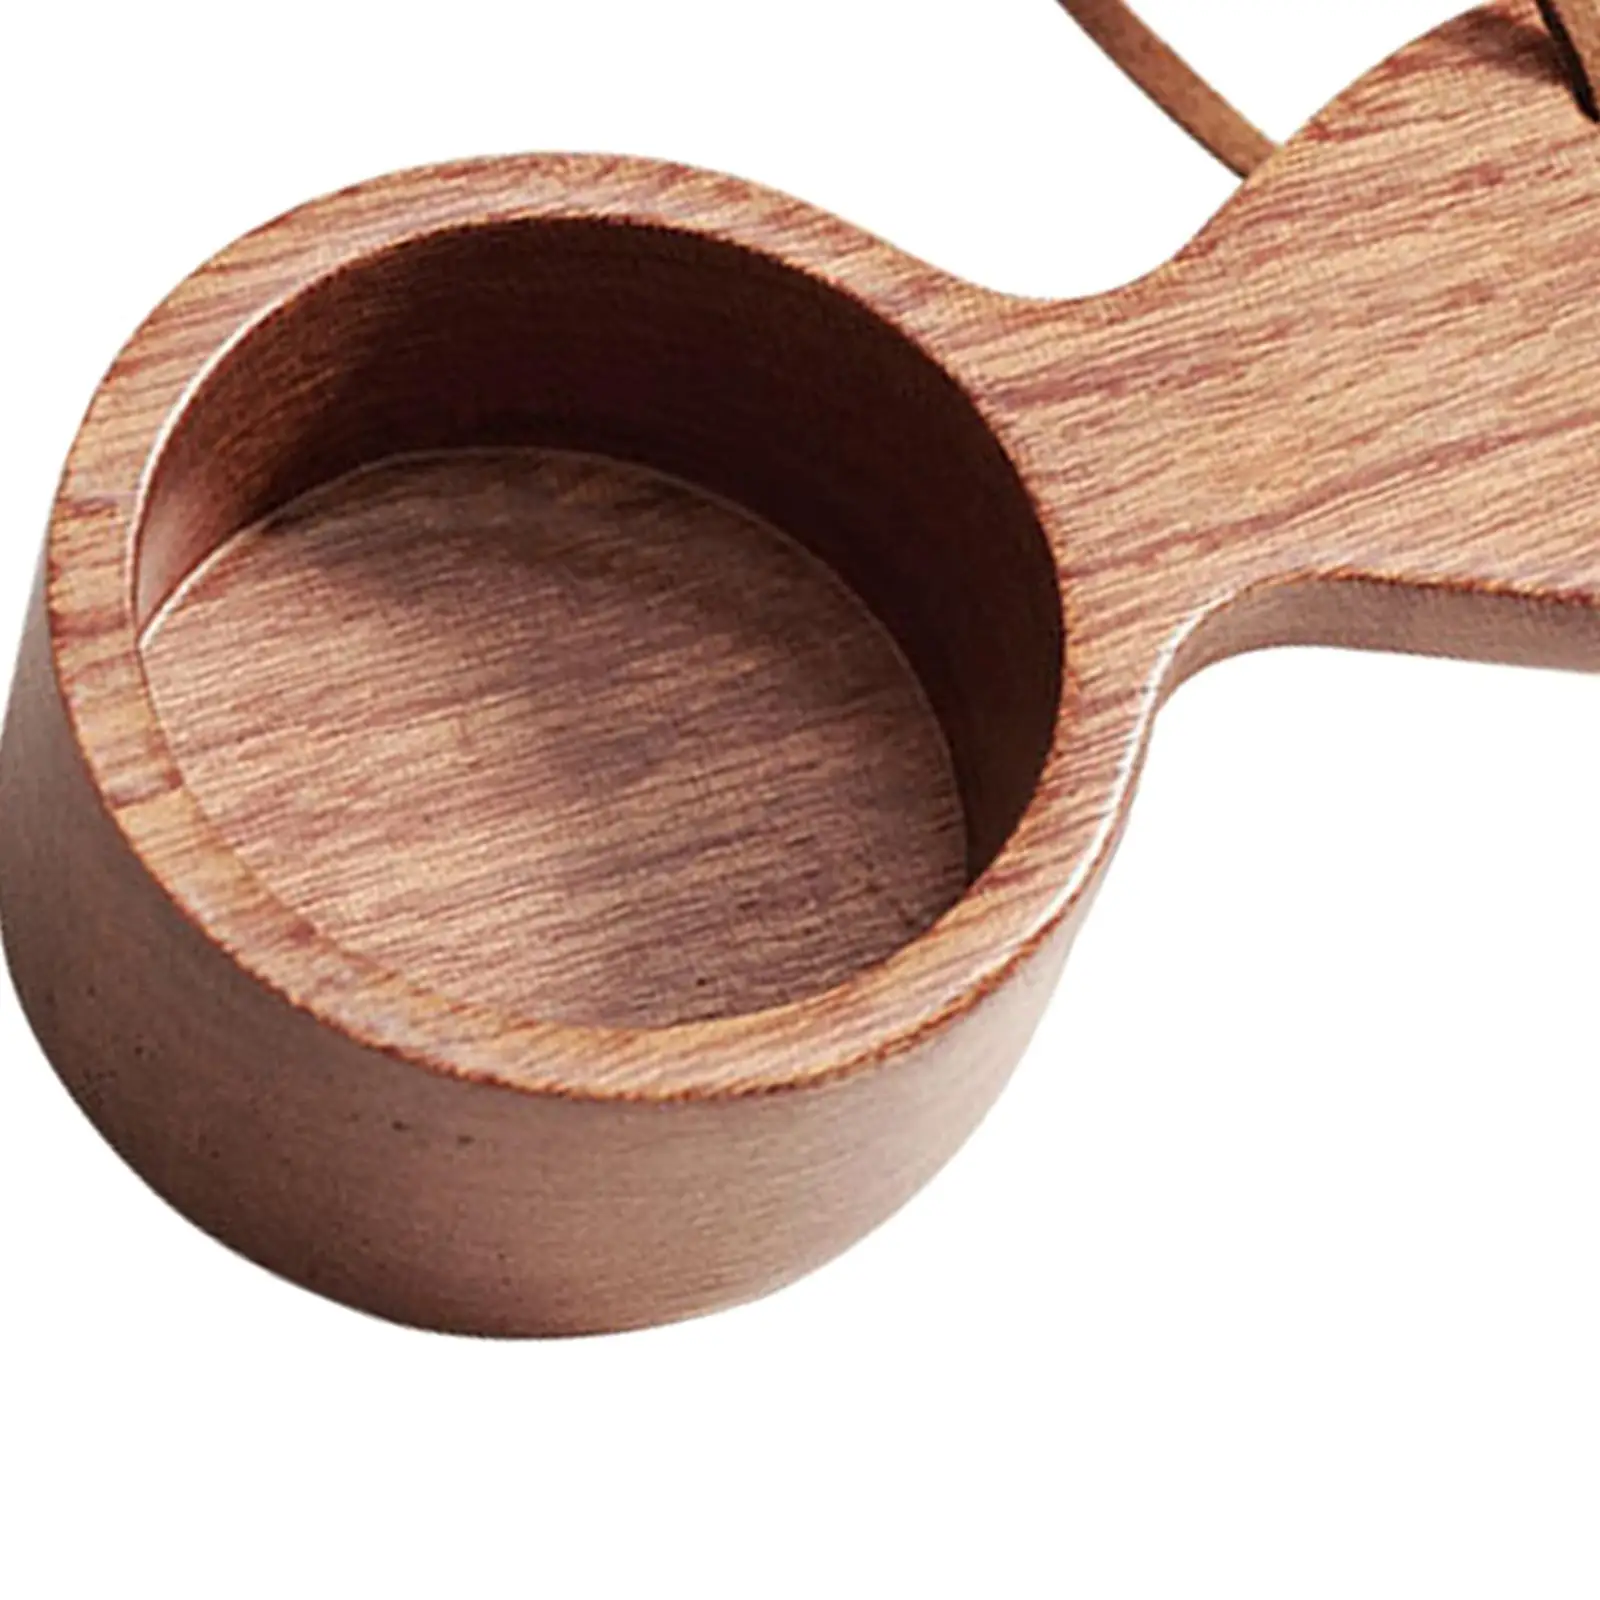 Wooden Coffee Measure Spoon Small Wall Mount Coffee Bean Measuring Spoon Coffee Bean for Camping Gadget